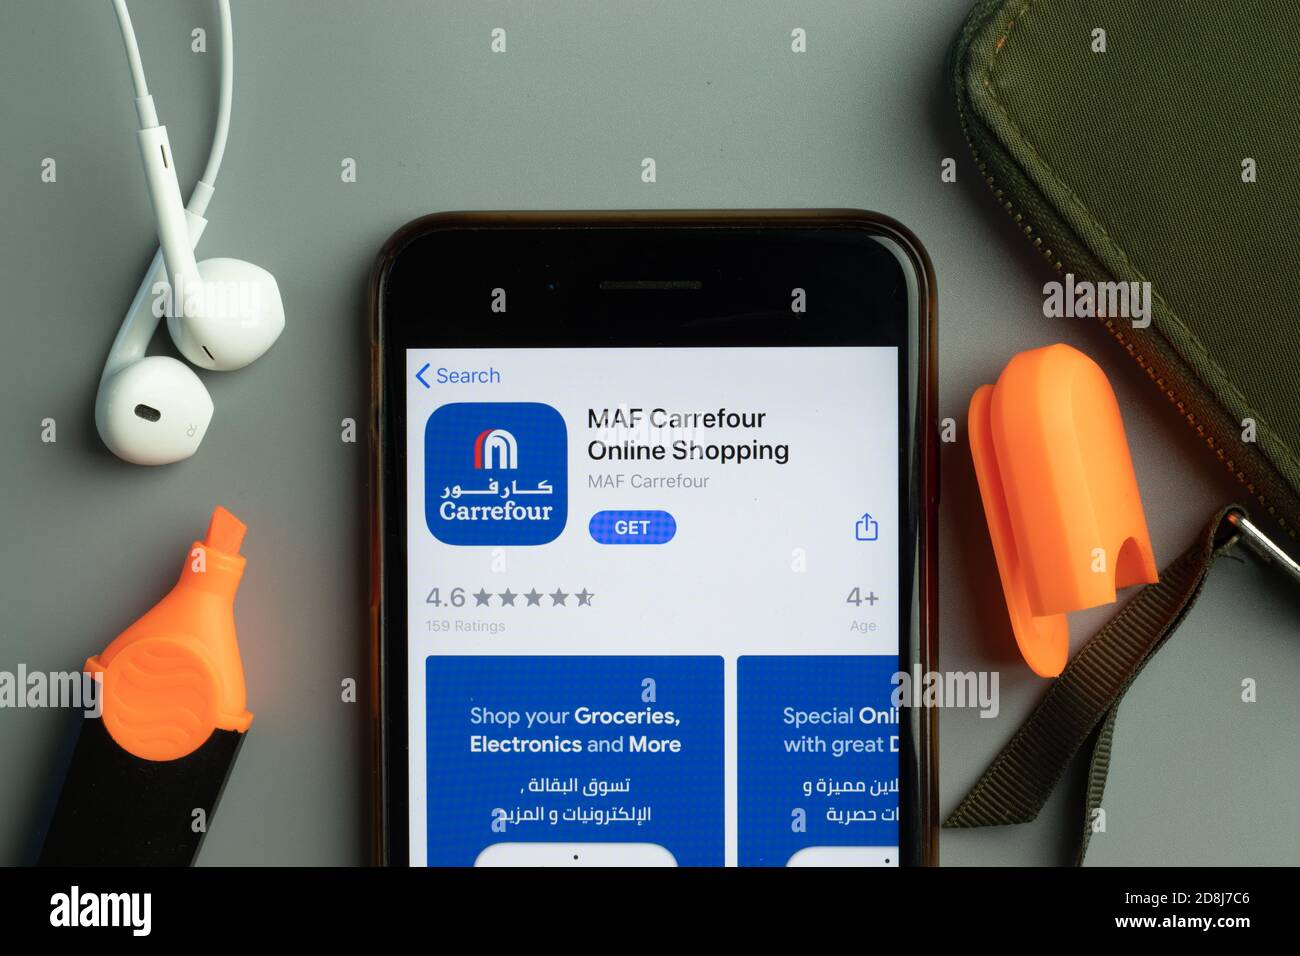 New York, USA - 26 October 2020: MAF Carrefour Online Shopping mobile app icon logo on phone screen close-up, Illustrative Editorial Stock Photo